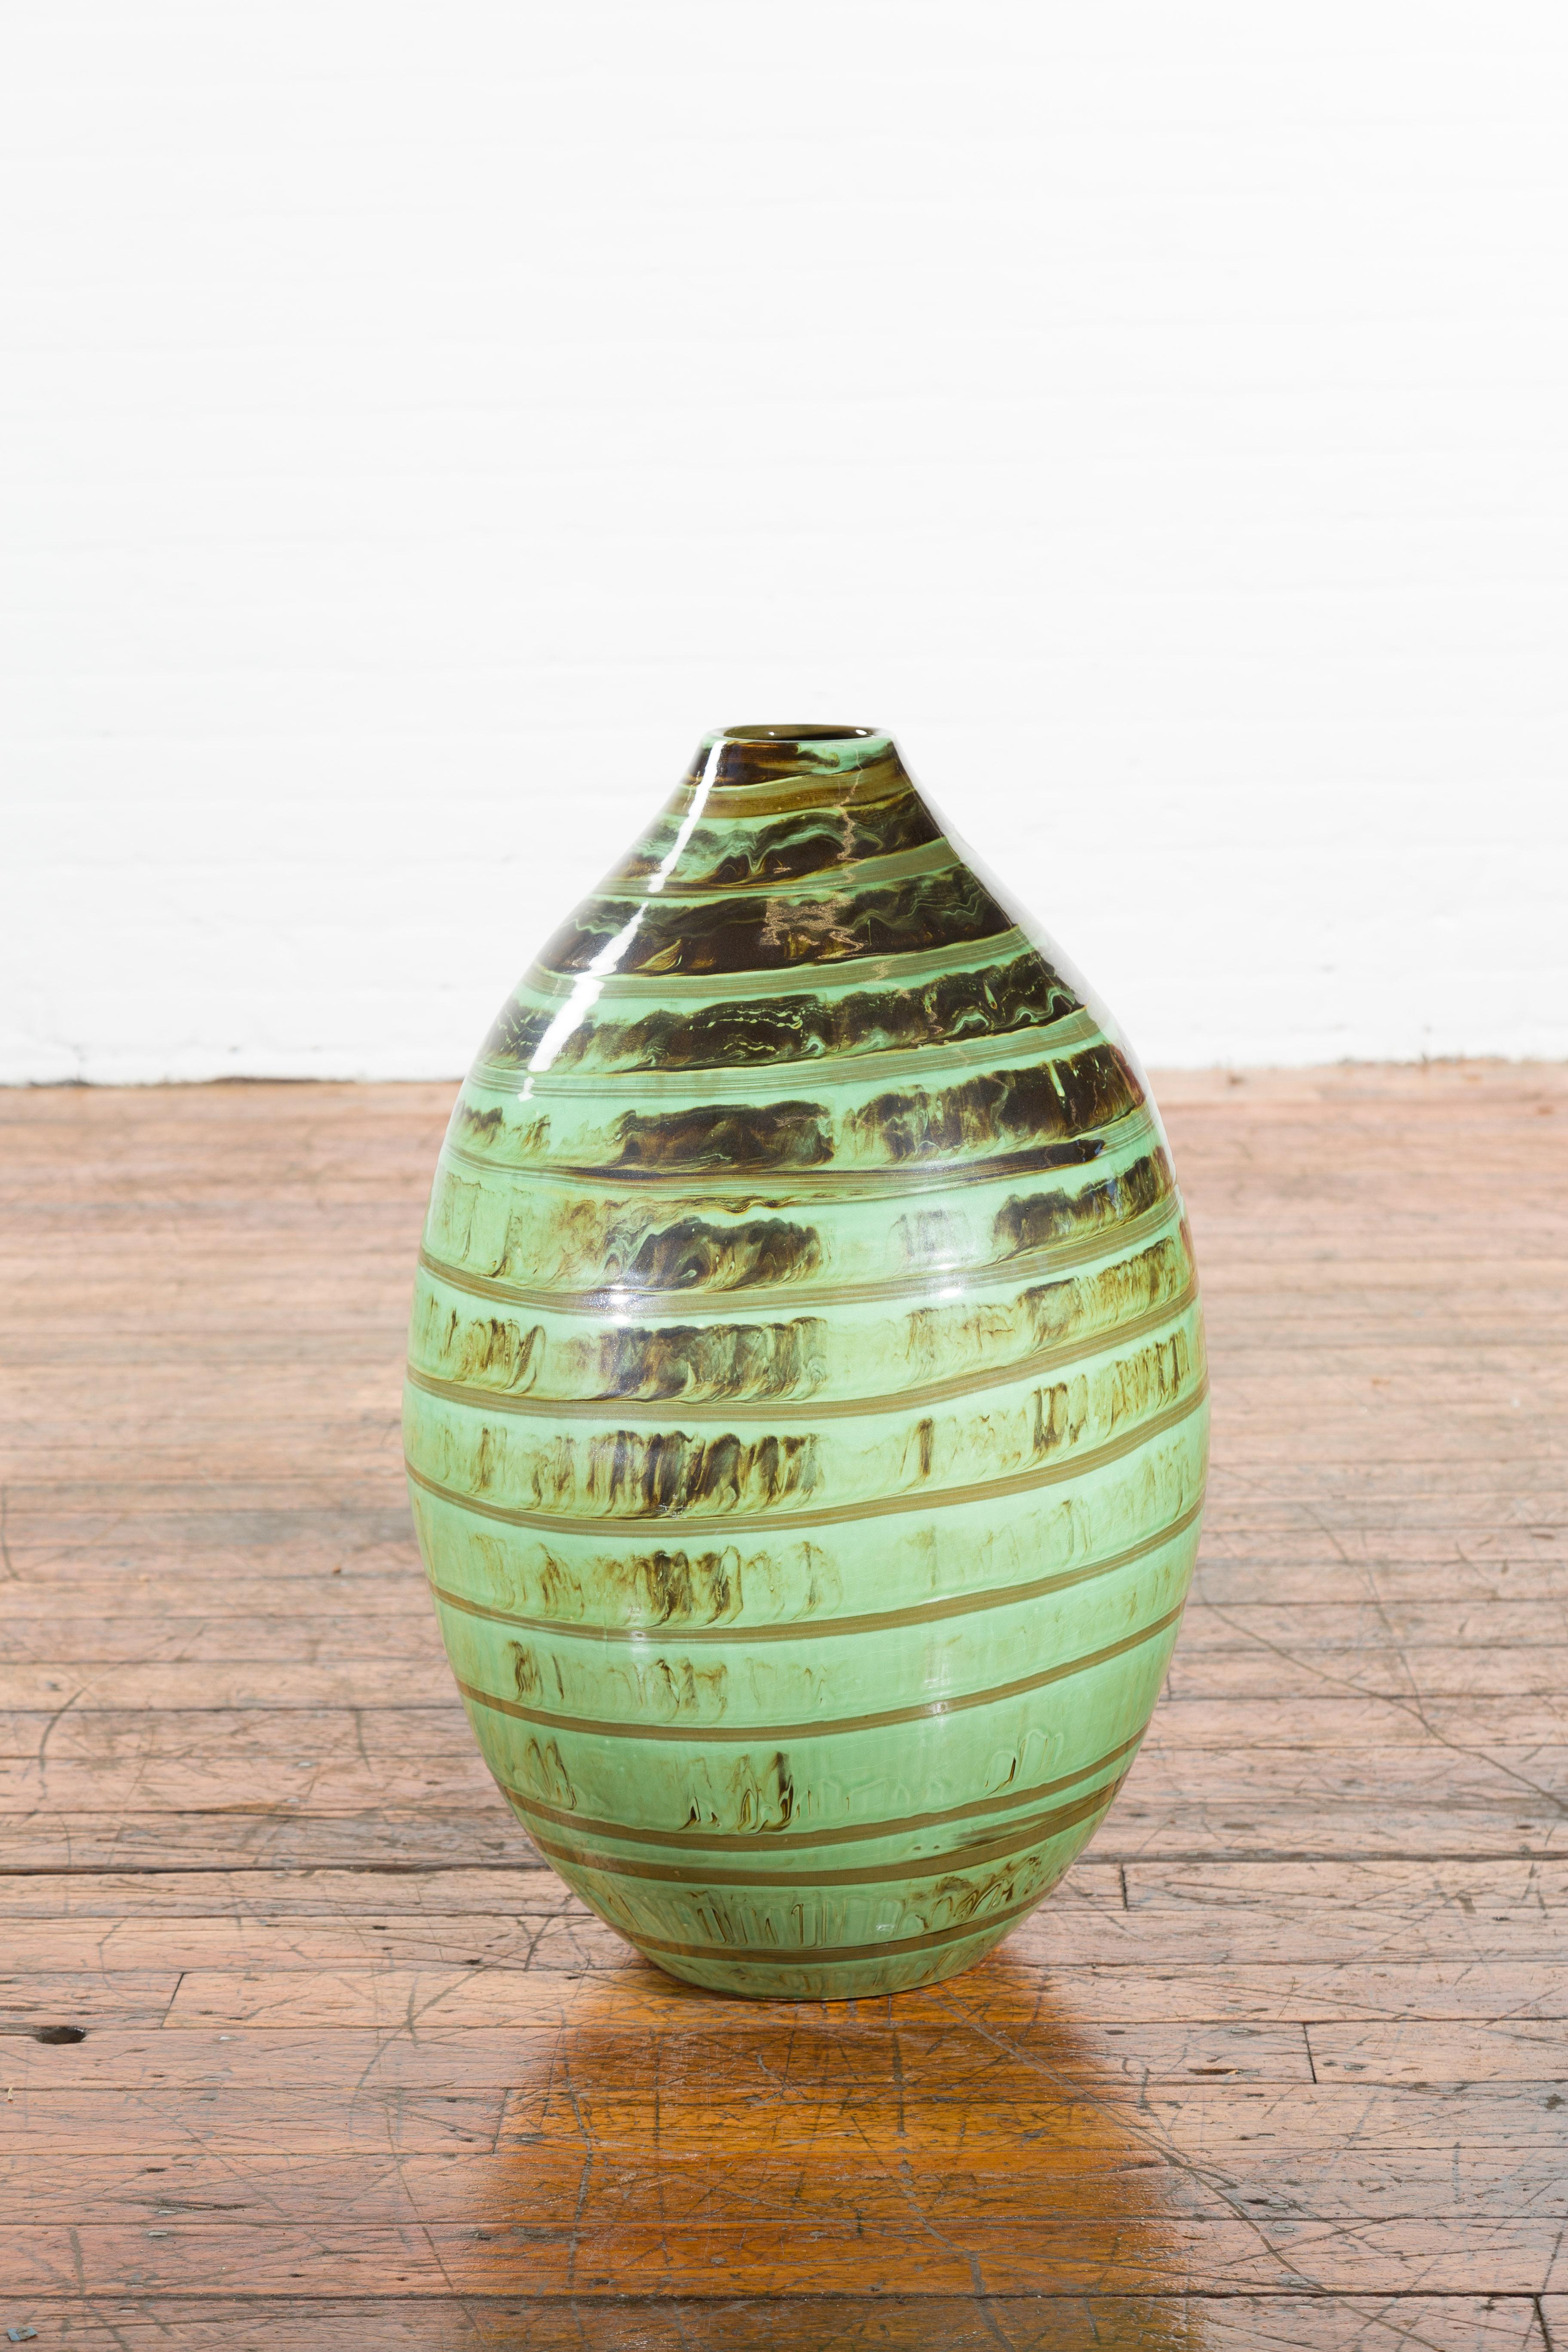 Thai Artisan Contemporary Green and Brown Glaze Ceramic Vase with Spiral Decor For Sale